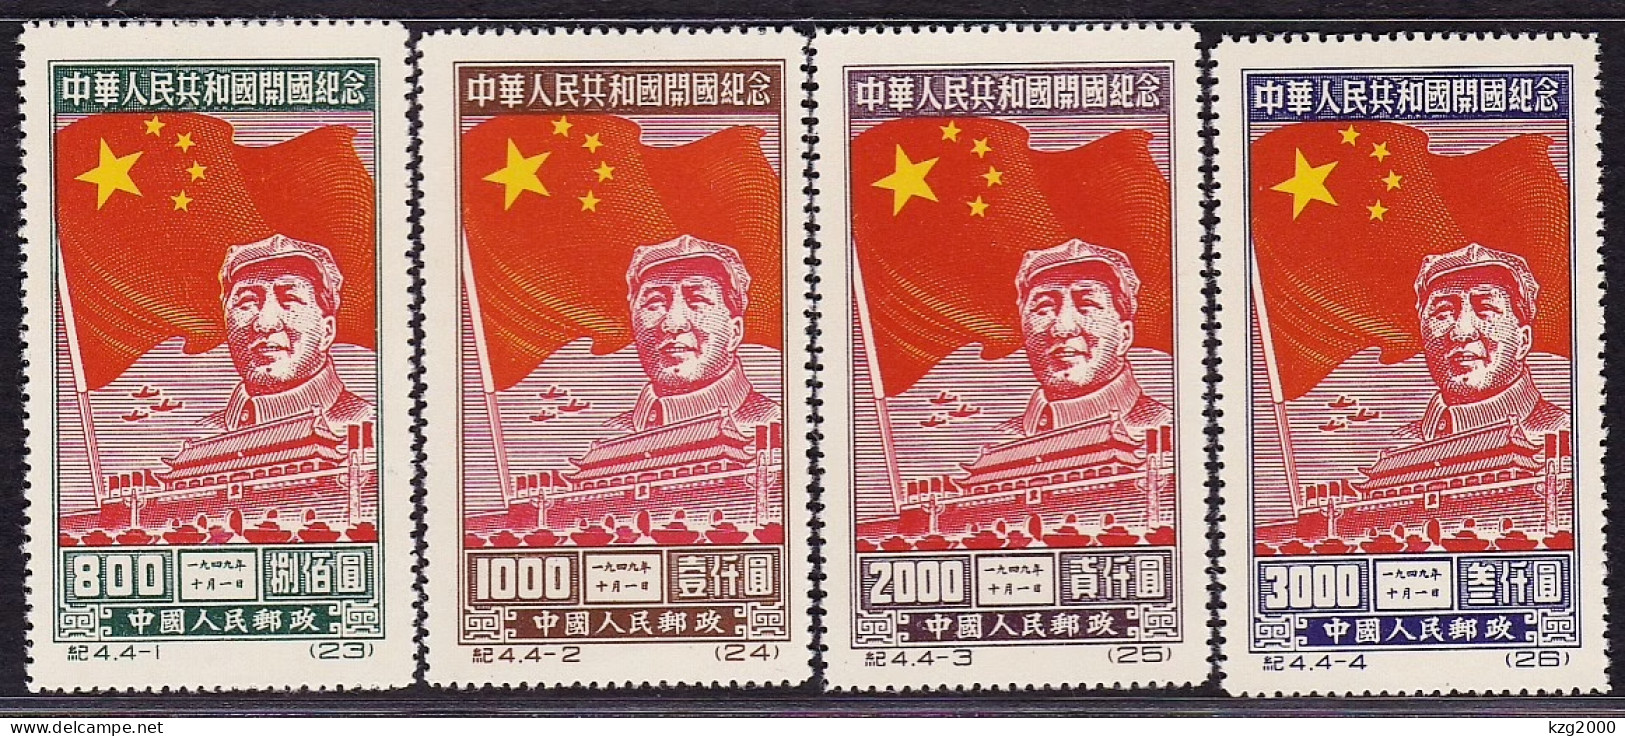 China 1950 Stamps C4 Commemorating Inauguration Of PRC 2nd Print Stamp - Plaatfouten En Curiosa